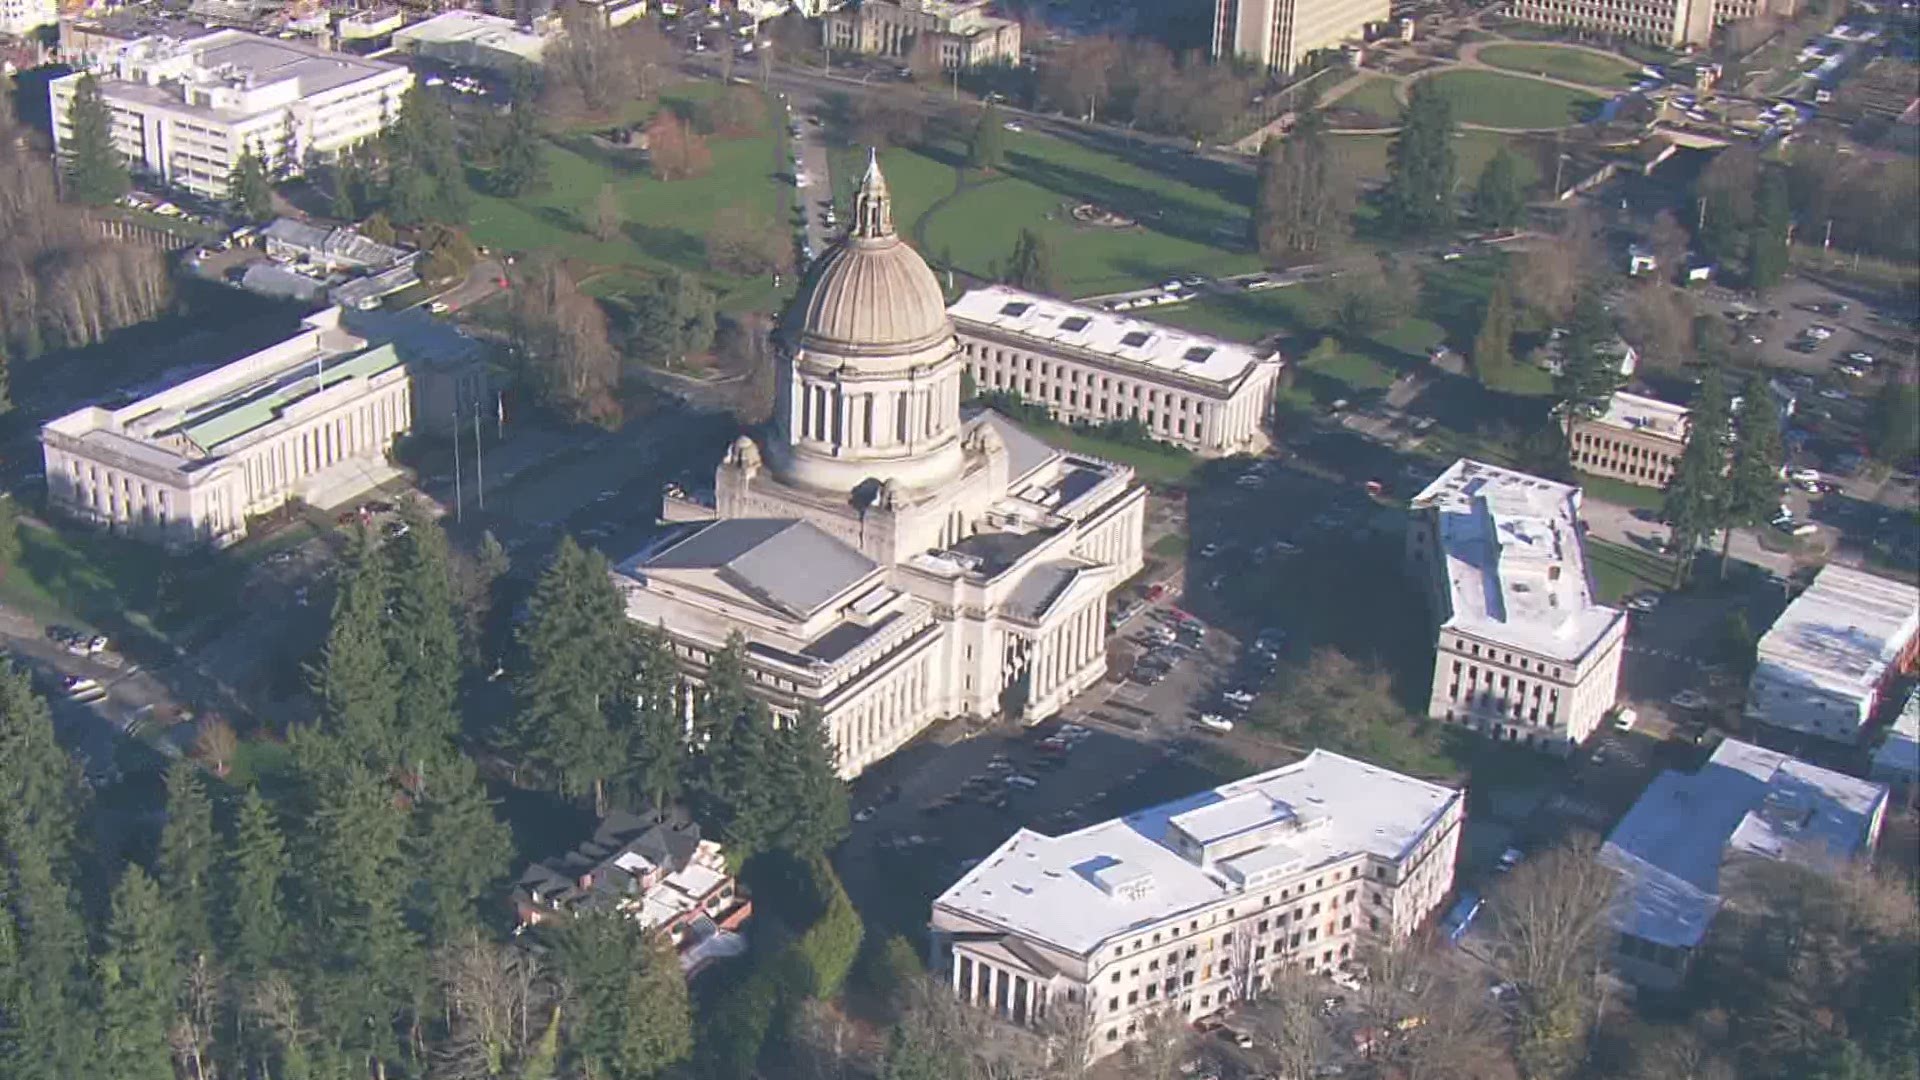 Citing a downturn in revenue, Gov. Jay Inslee announced most state employees will be furloughed and a 3% scheduled raise will be canceled for some workers.